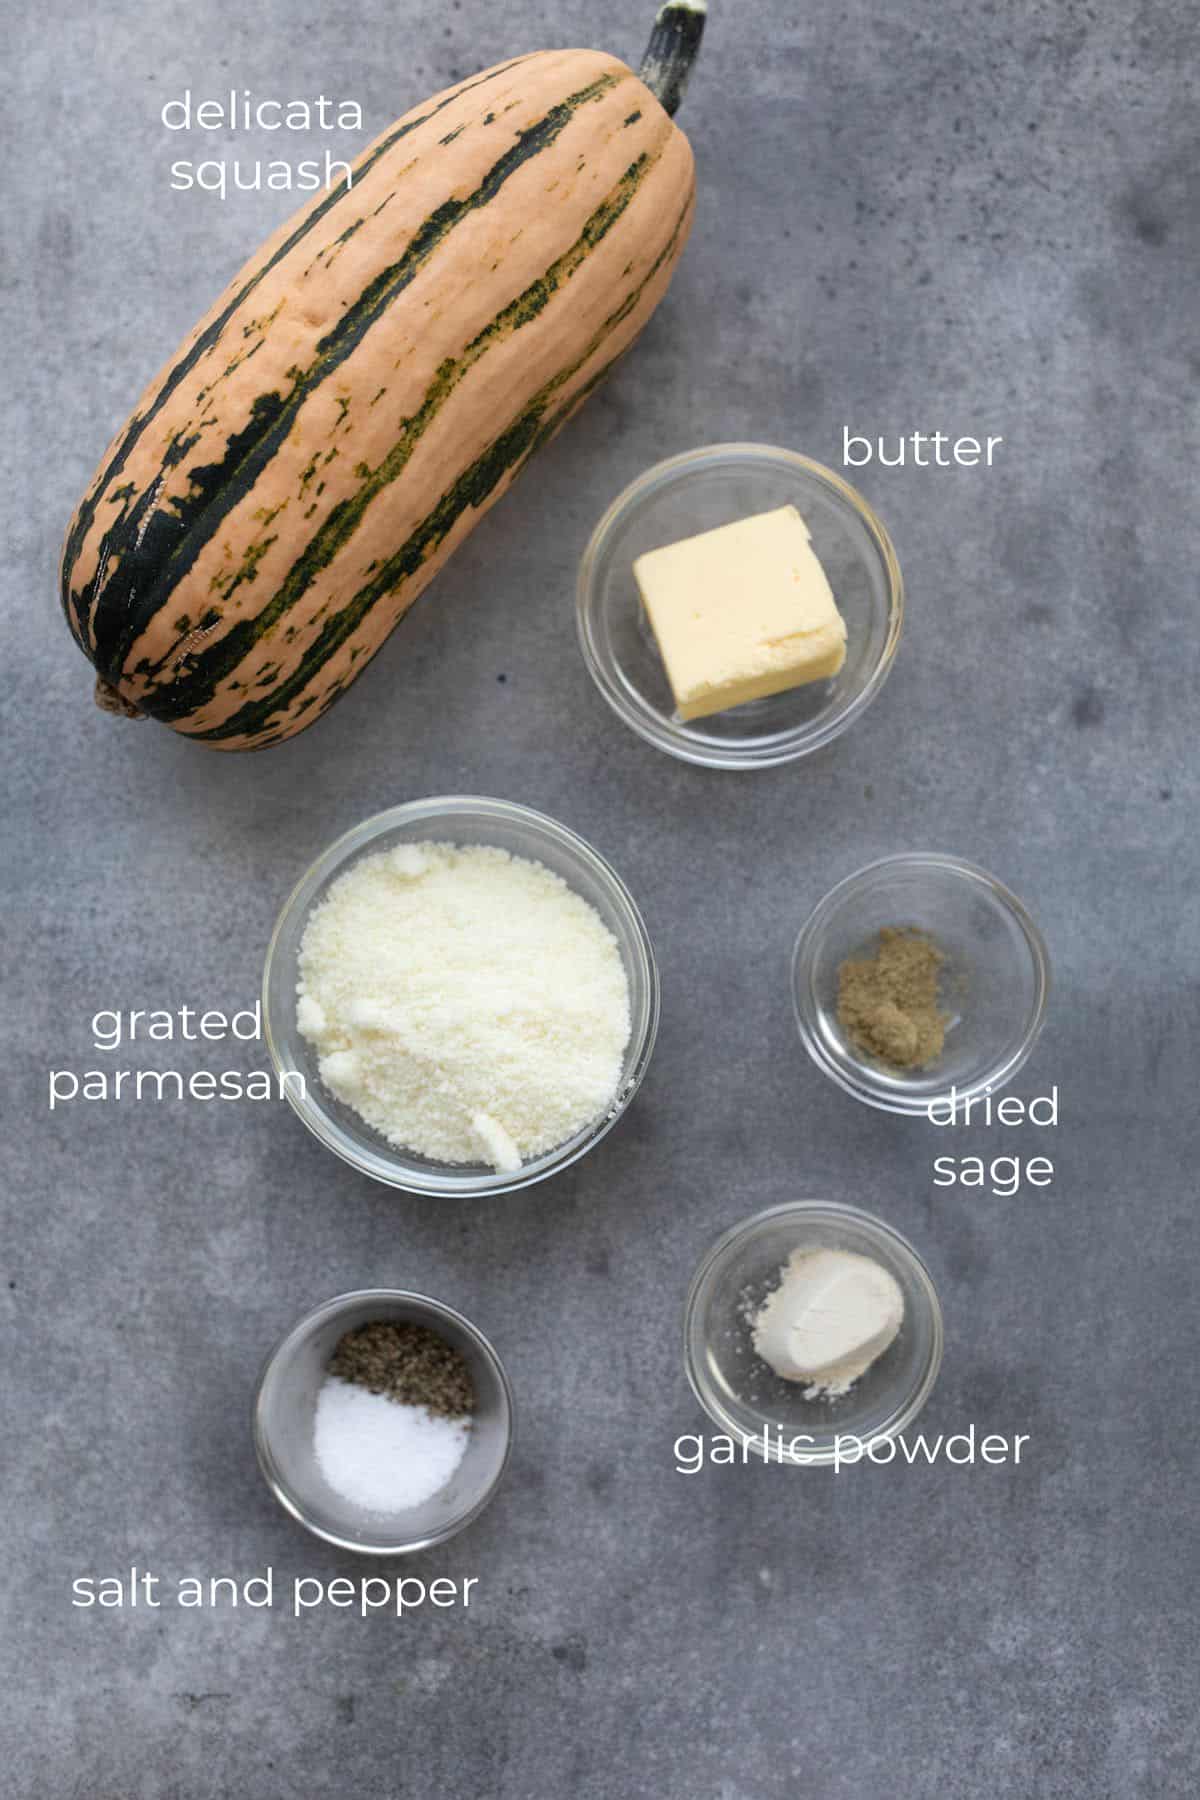 Top down image of ingredients needed for Roasted Delicata Squash.